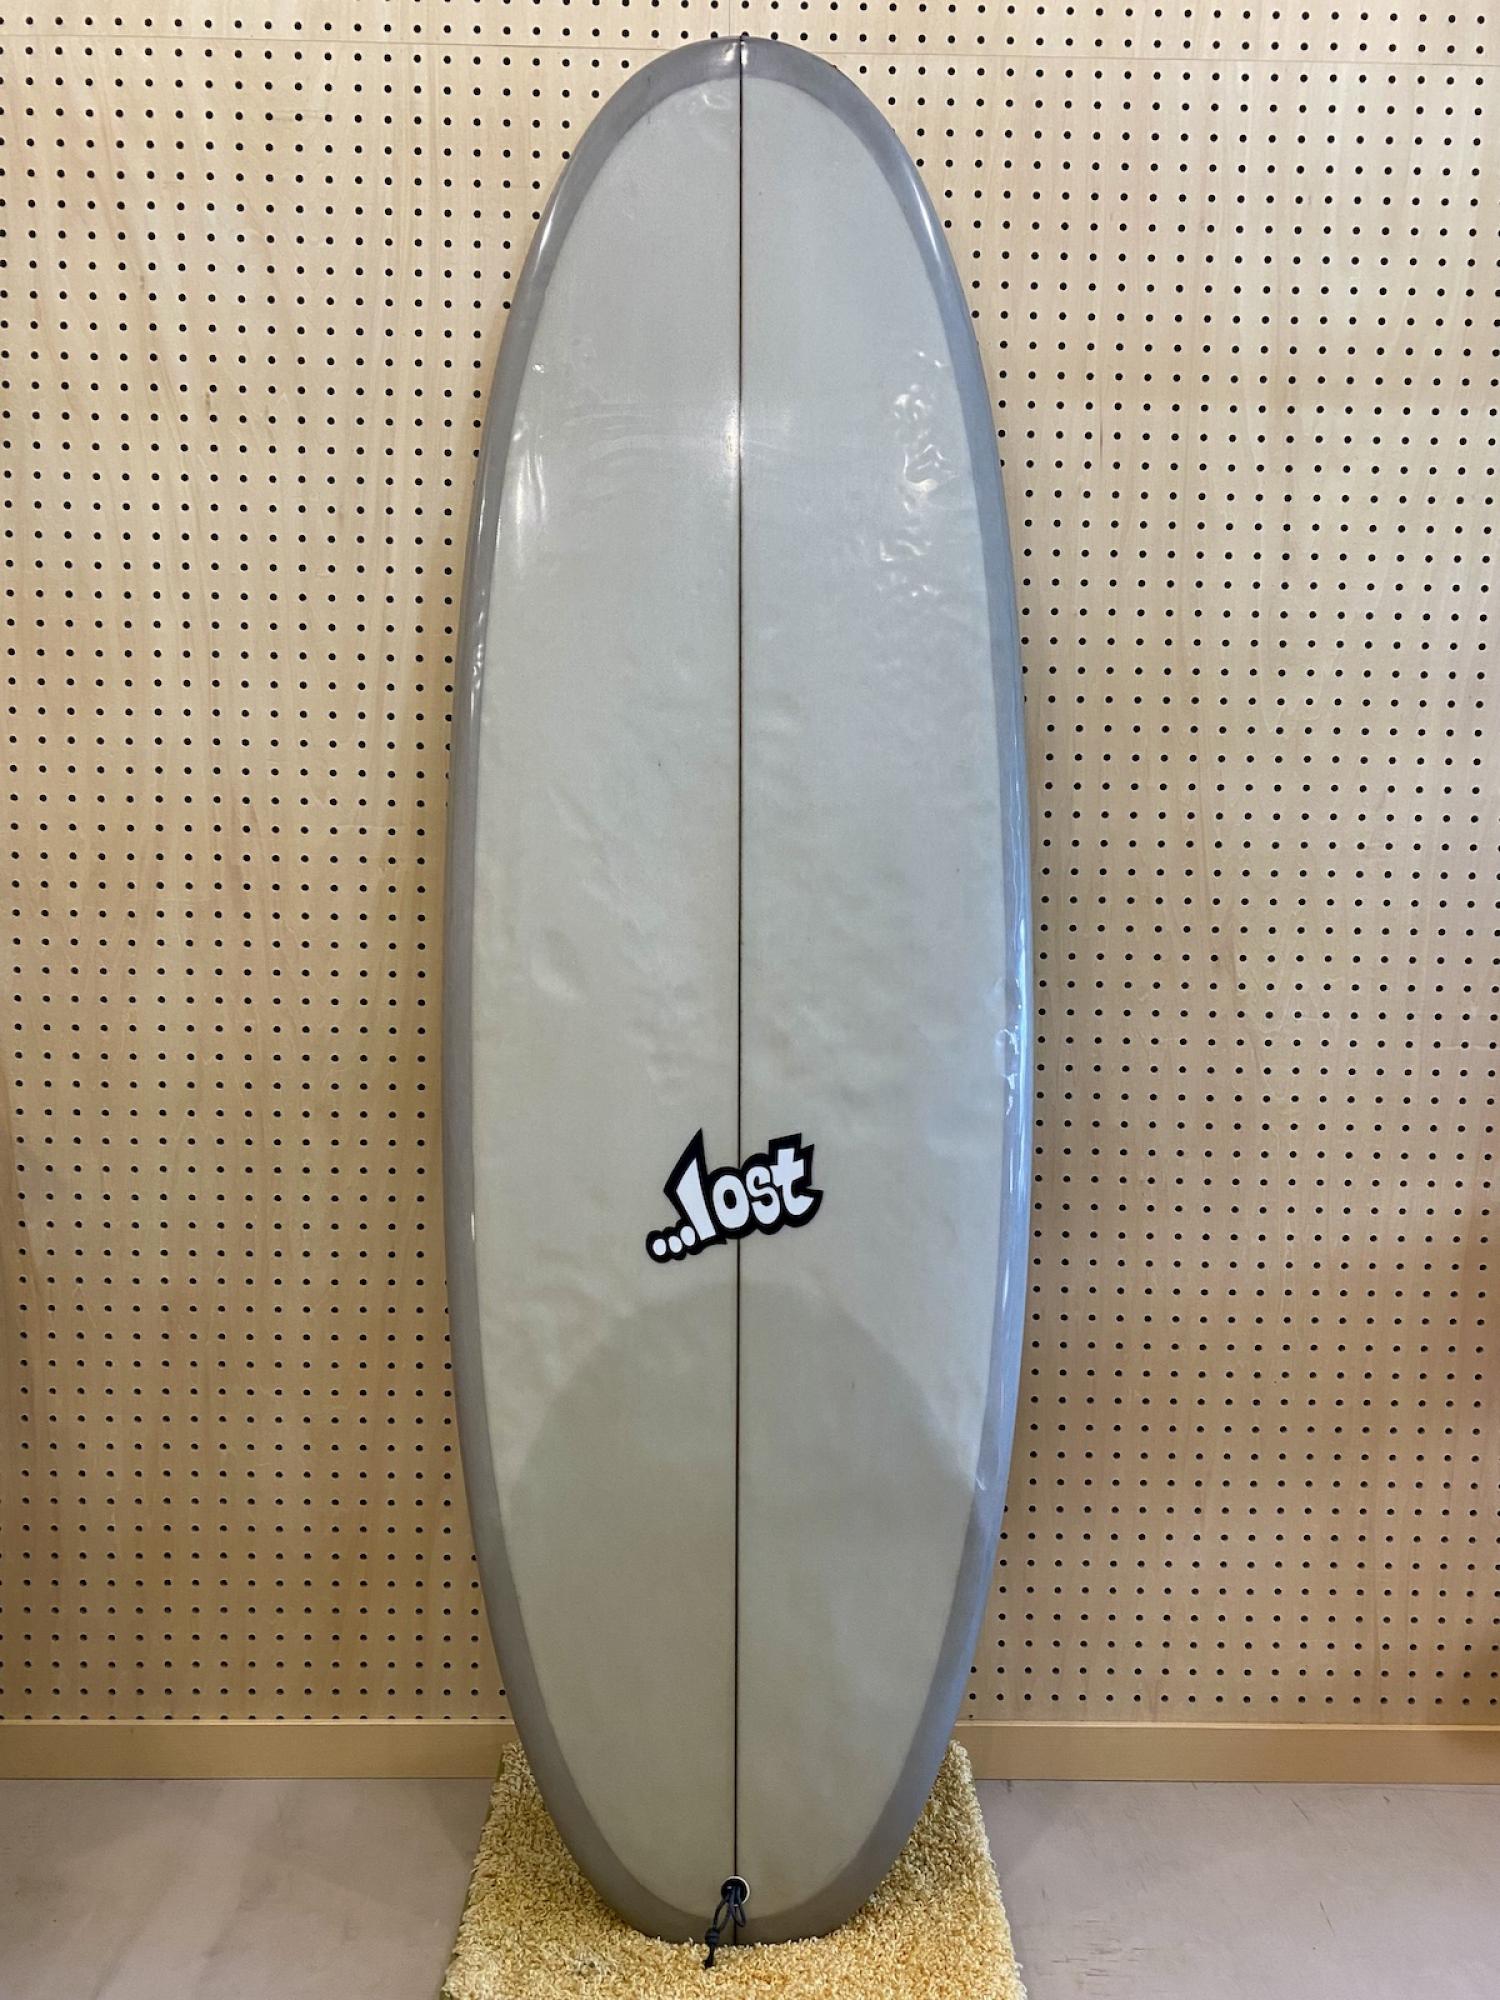 USED BOARDS ( LOST BEAN BAG 6.0)